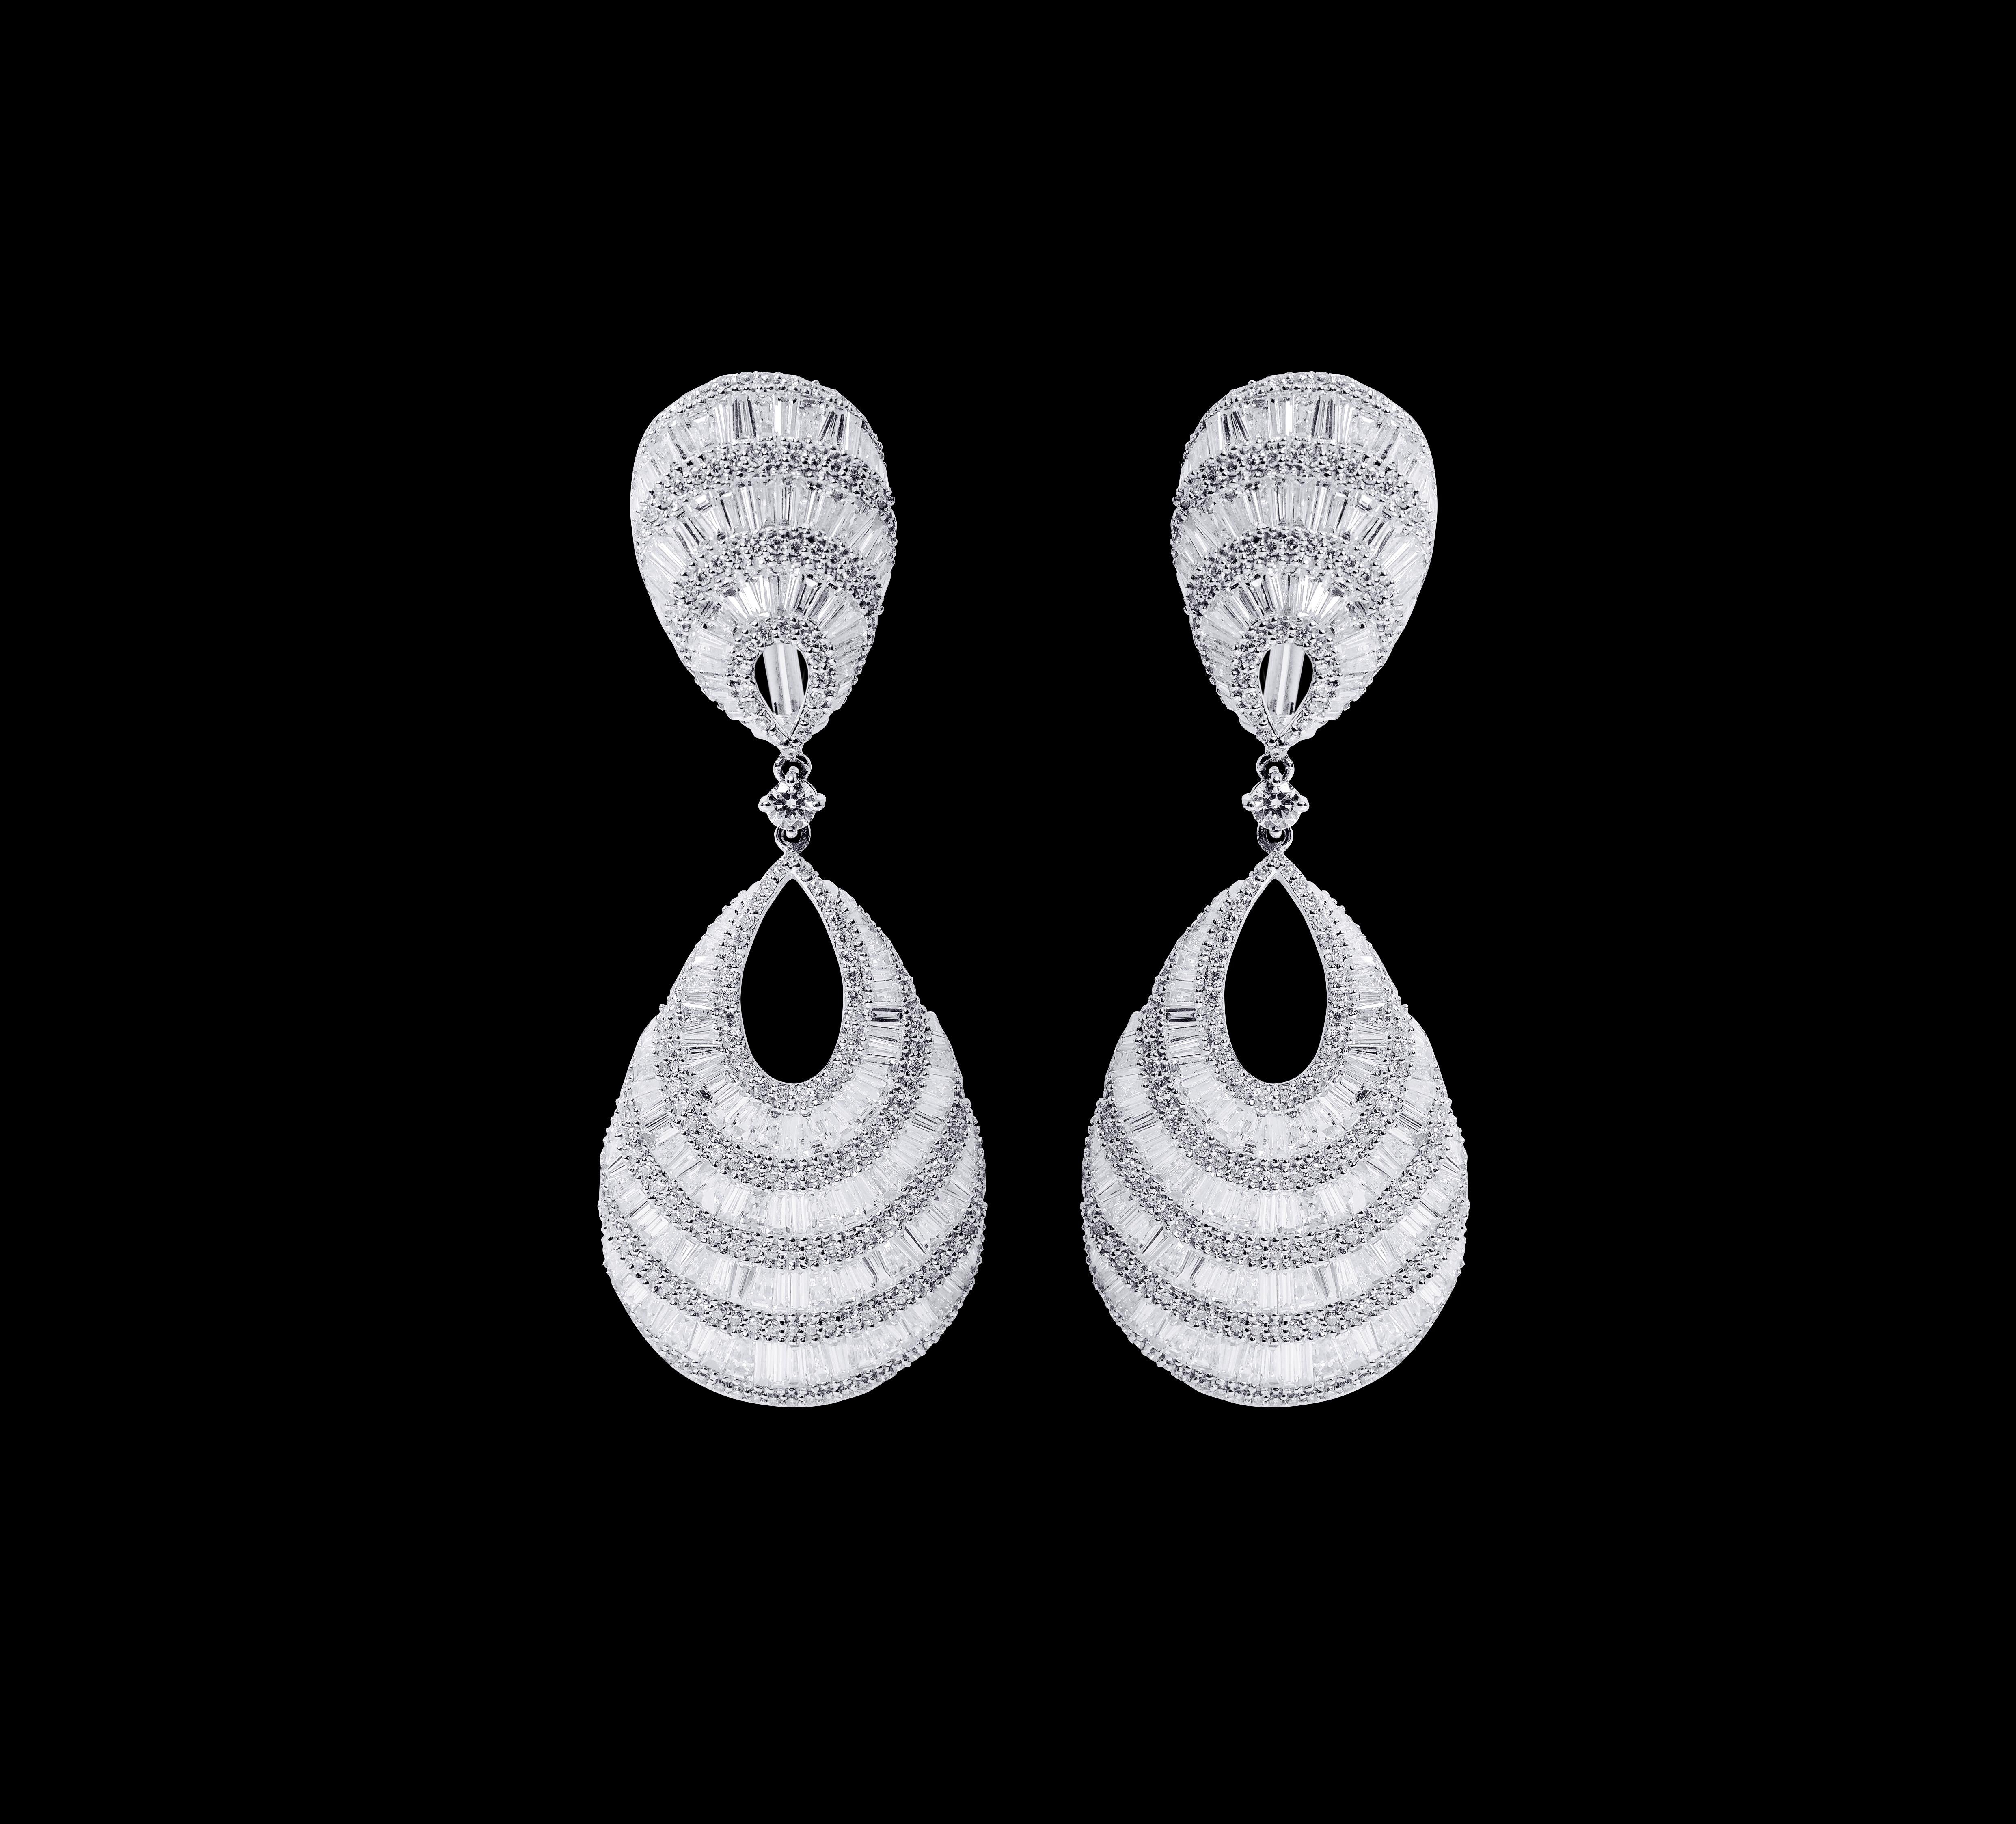 18 Karat White Gold 12.74 Carat Diamond Drop Cocktail Statement Earrings

This is a fascinating collection of baguette tapered finely cut diamonds all merged together creating this vibrating earring. The mix-use of baguette and tapper diamonds